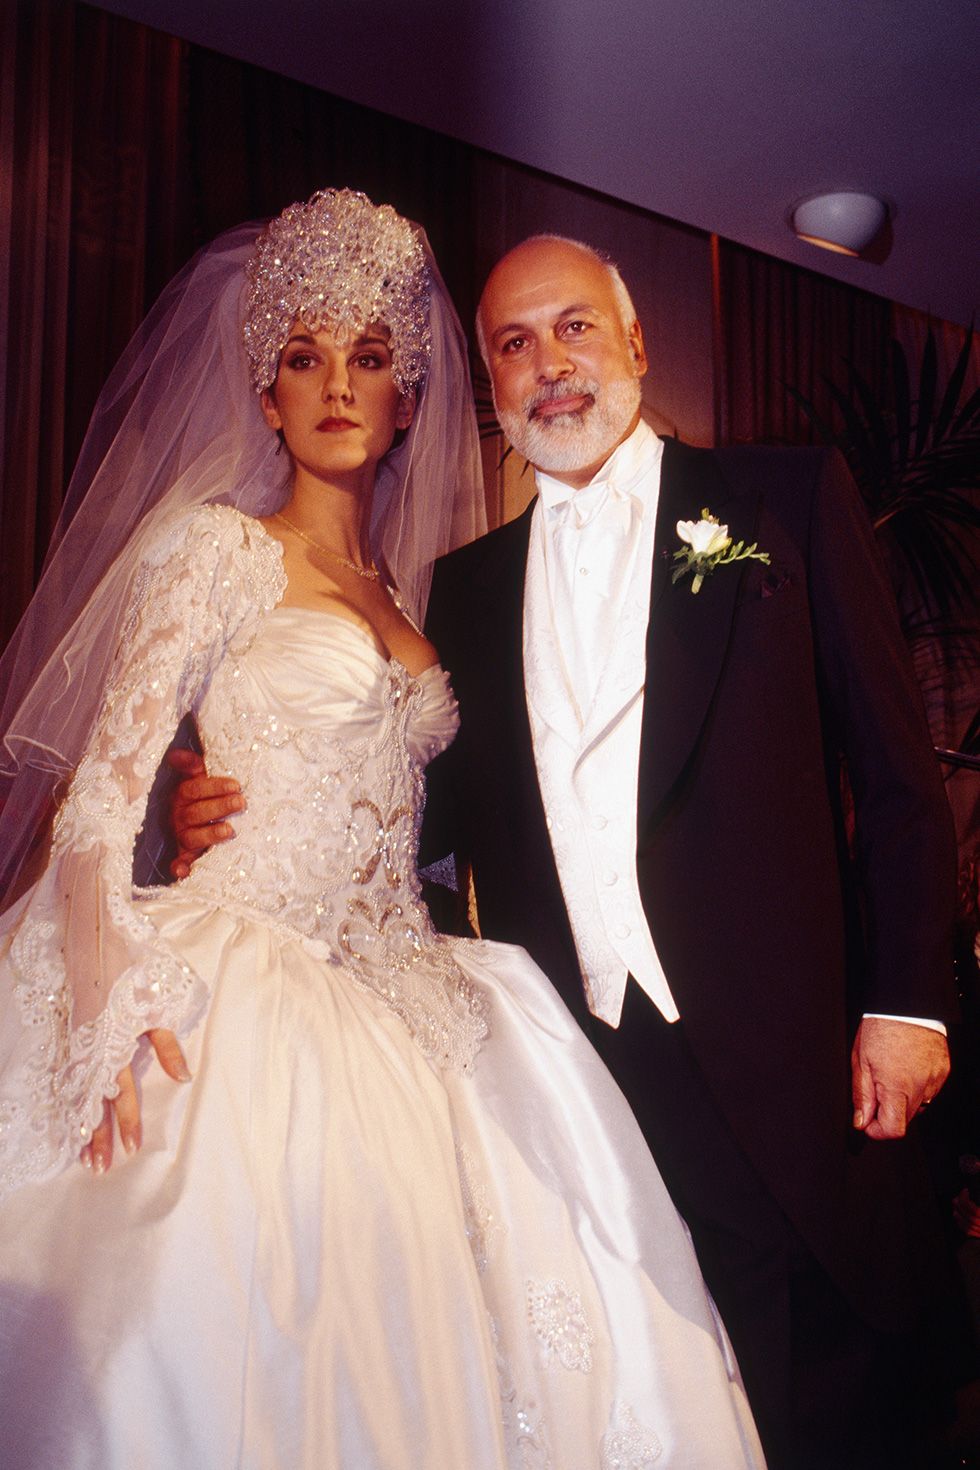 The Most Iconic Wedding Dresses of All Time